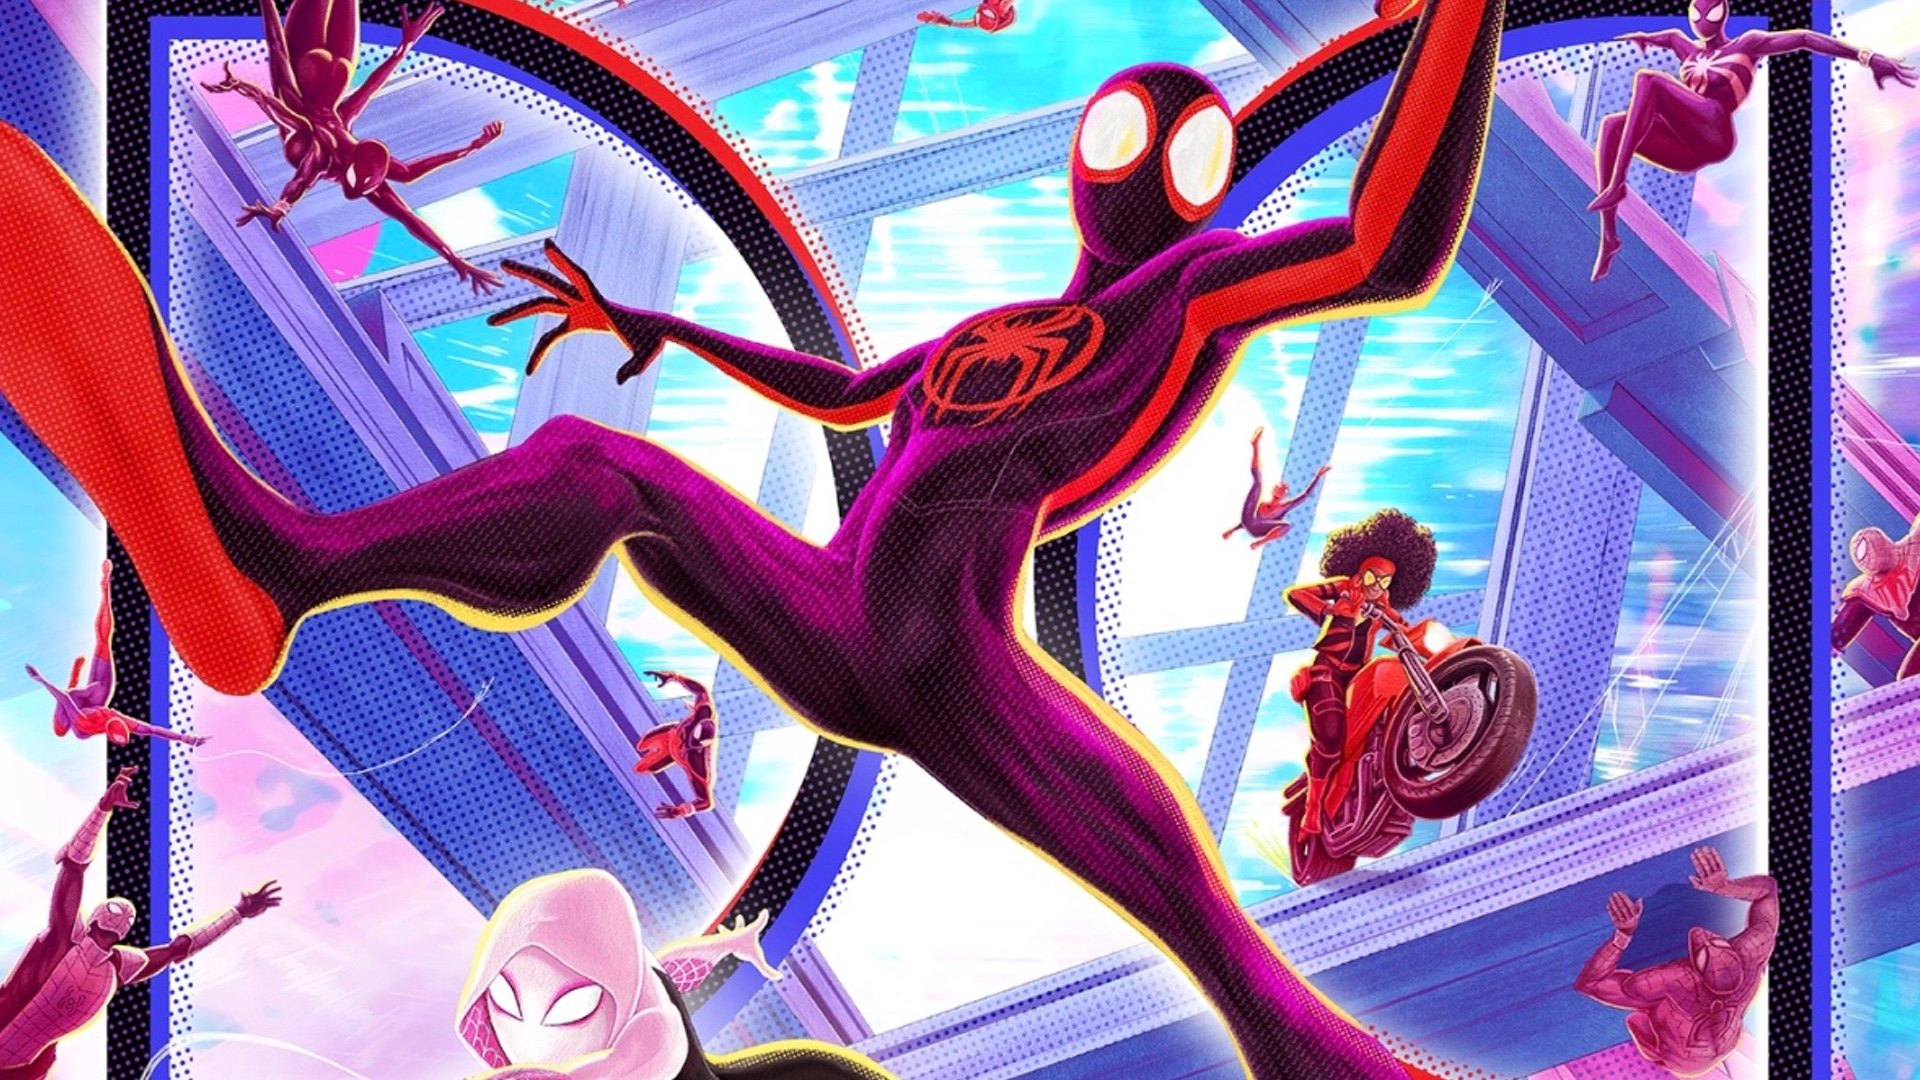 Spider-Man: Across the Spider-Verse: What the Cast Looks Like in